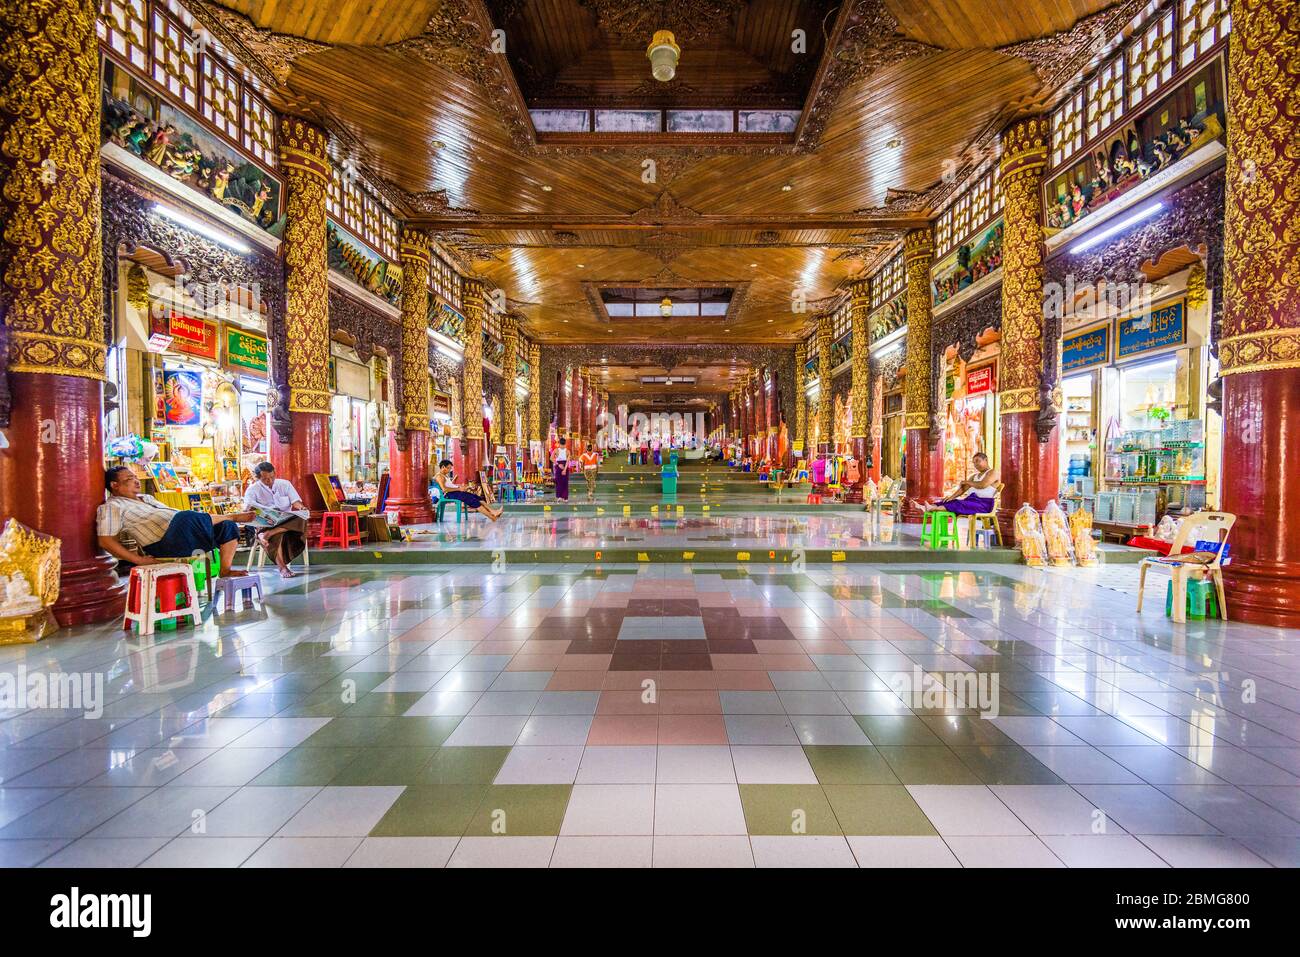 YANGON, MYANMAR - OCTOBER 16, 2015: Stalls and vendors line the corridor from the southern entrance to Shwedagon Pagoa. Stock Photo